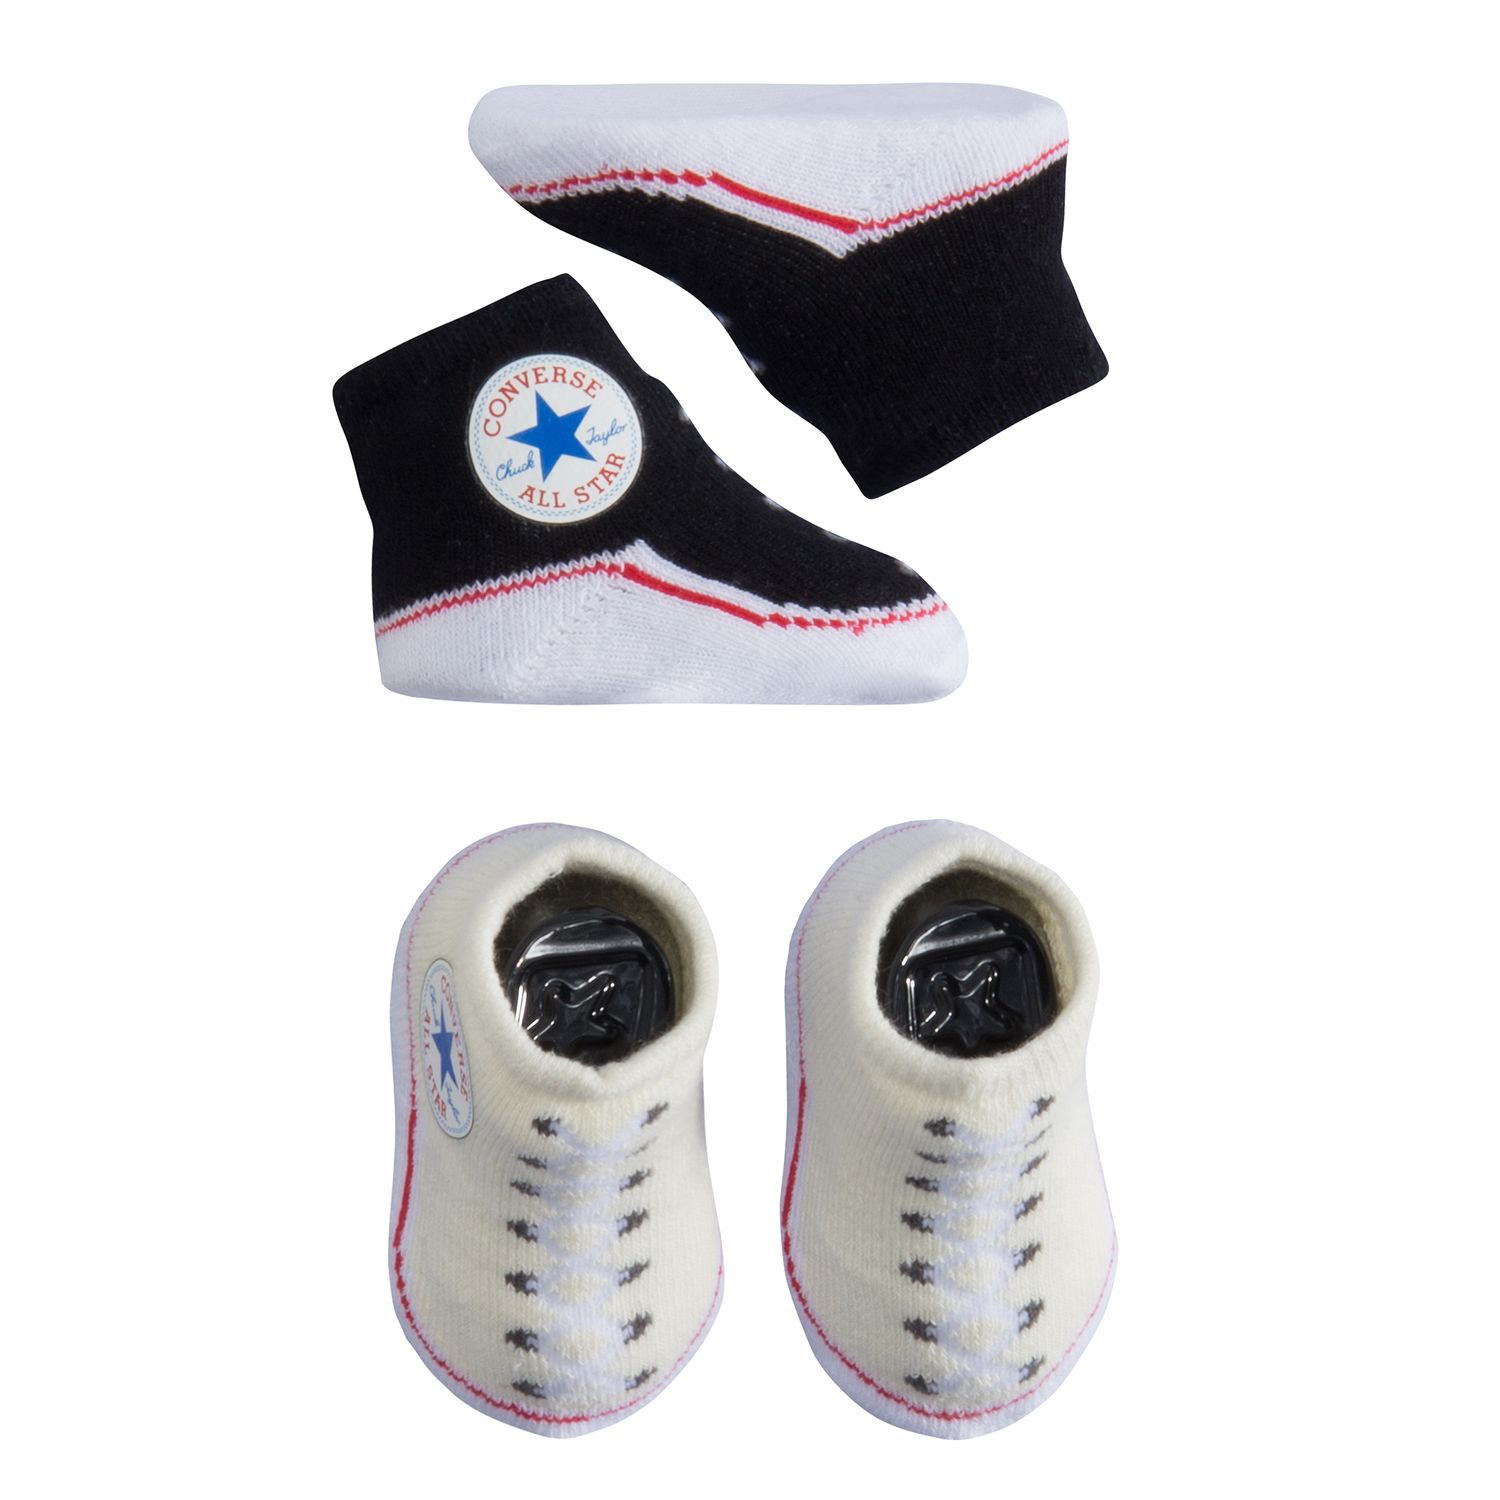 converse baby boots